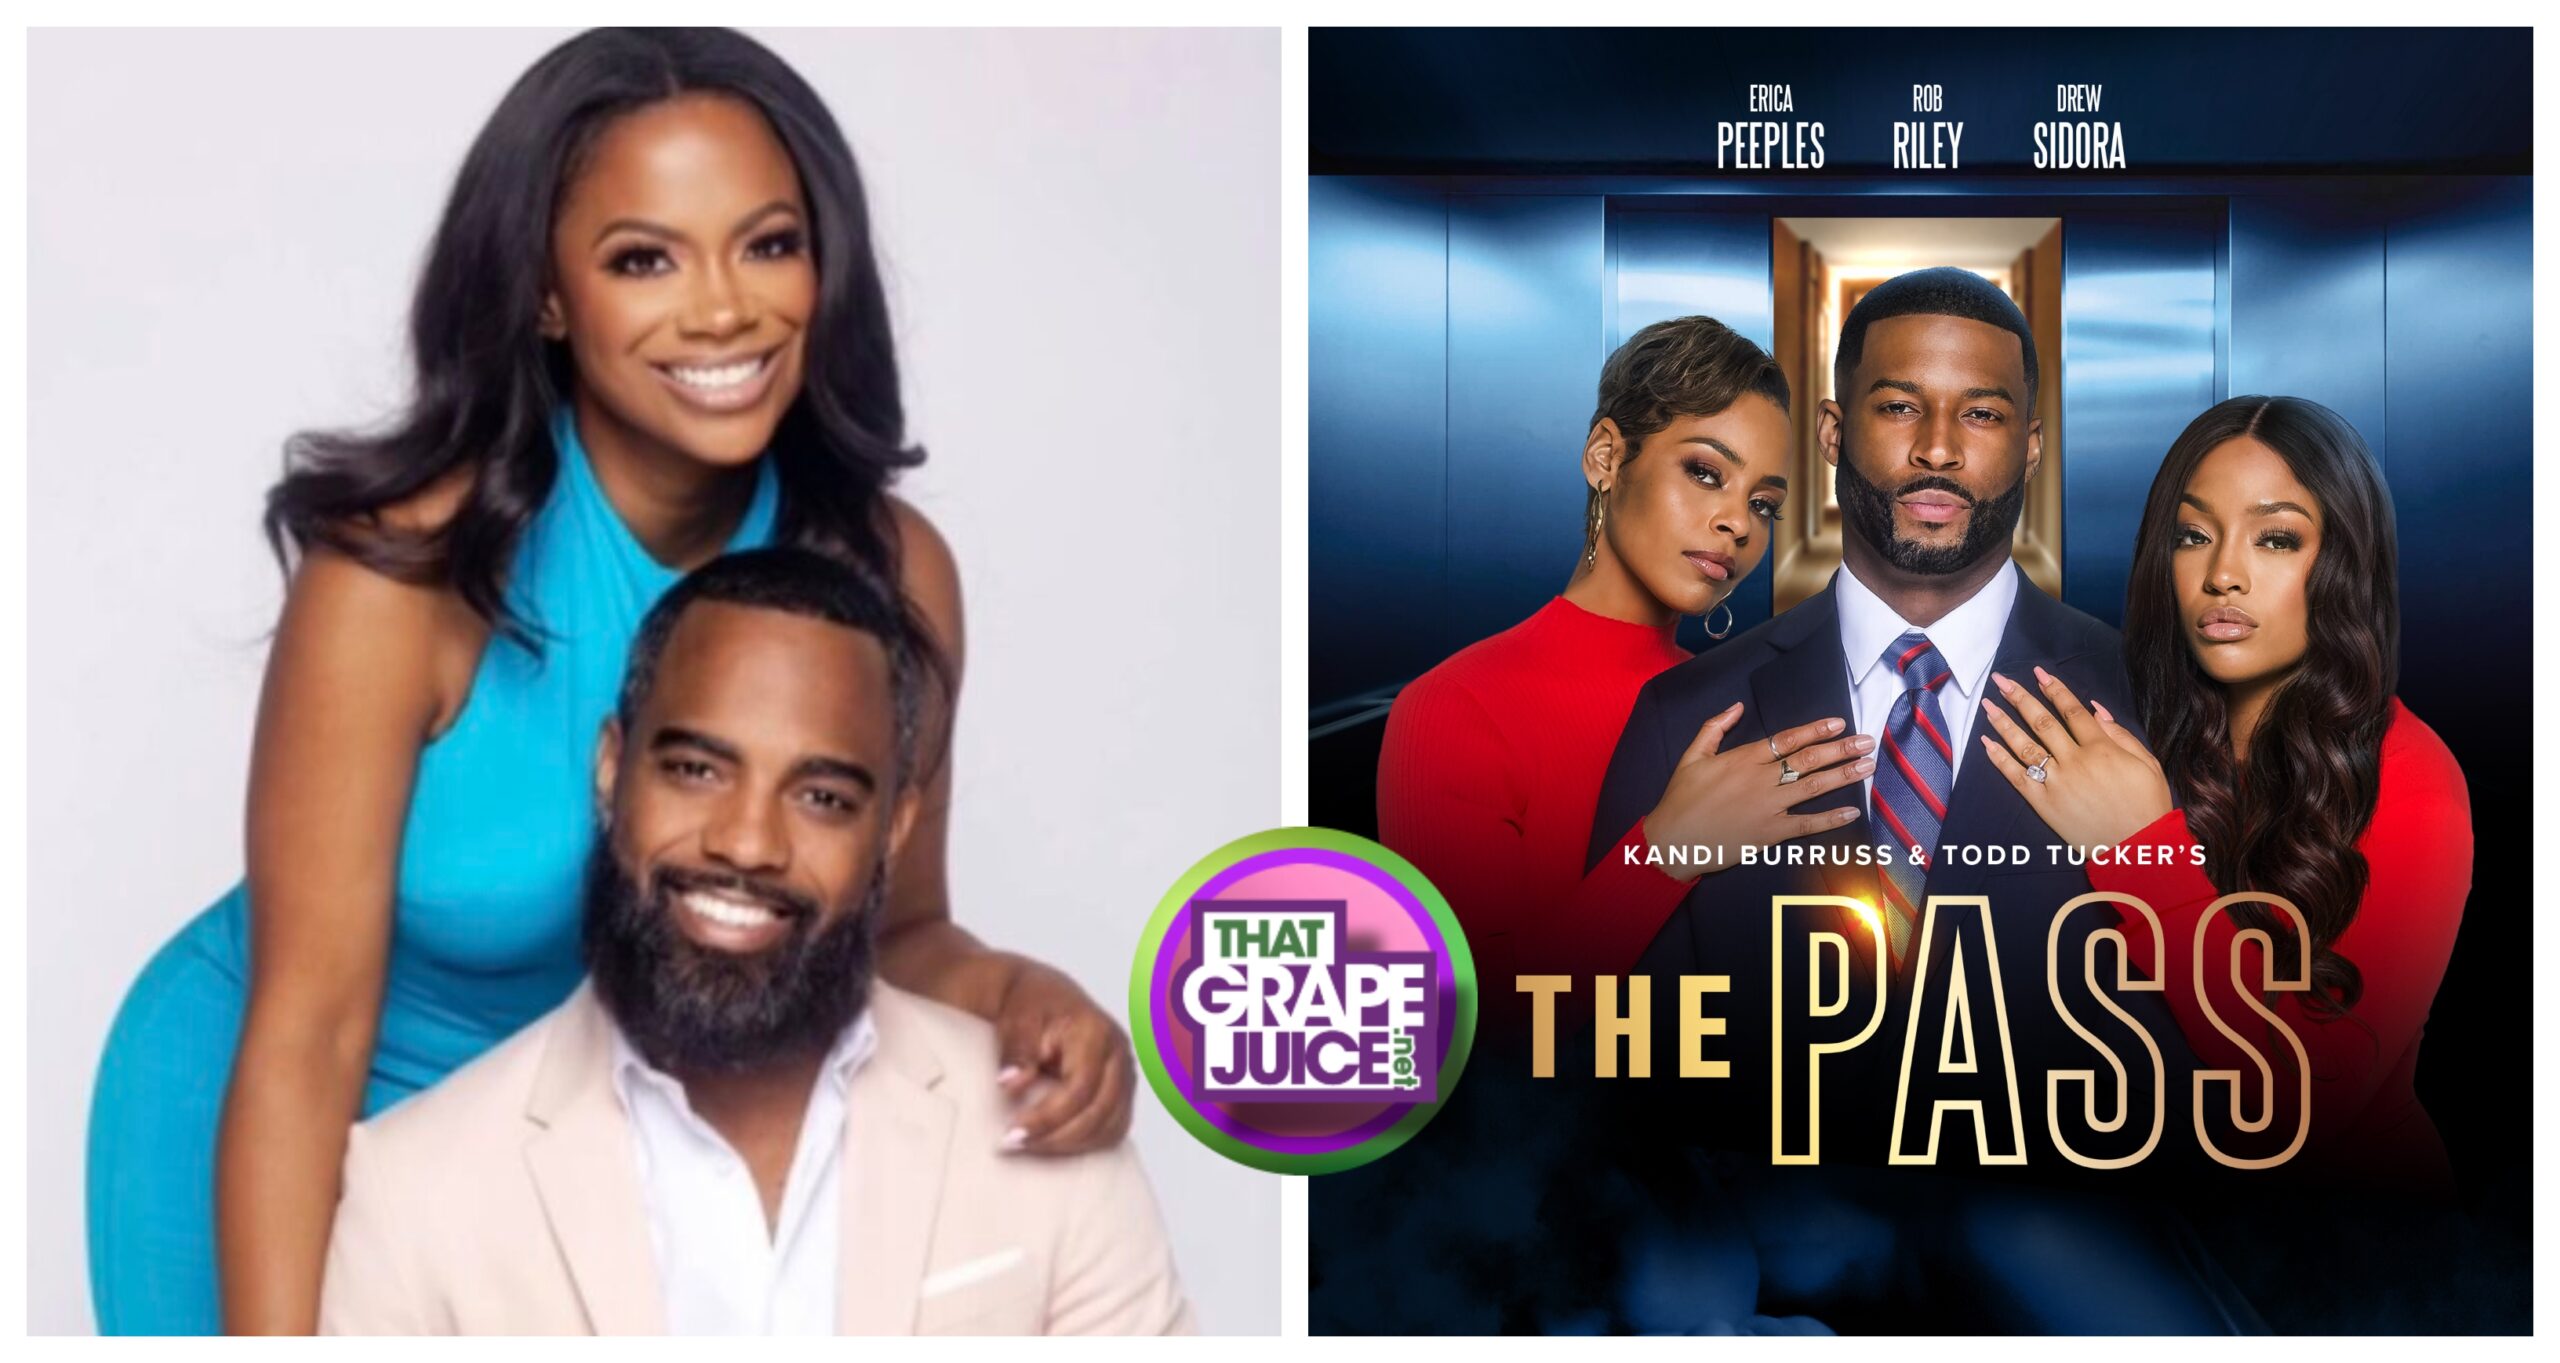 Kandi Burruss & Todd Tucker Announce the Release of 'The Pass (Starring